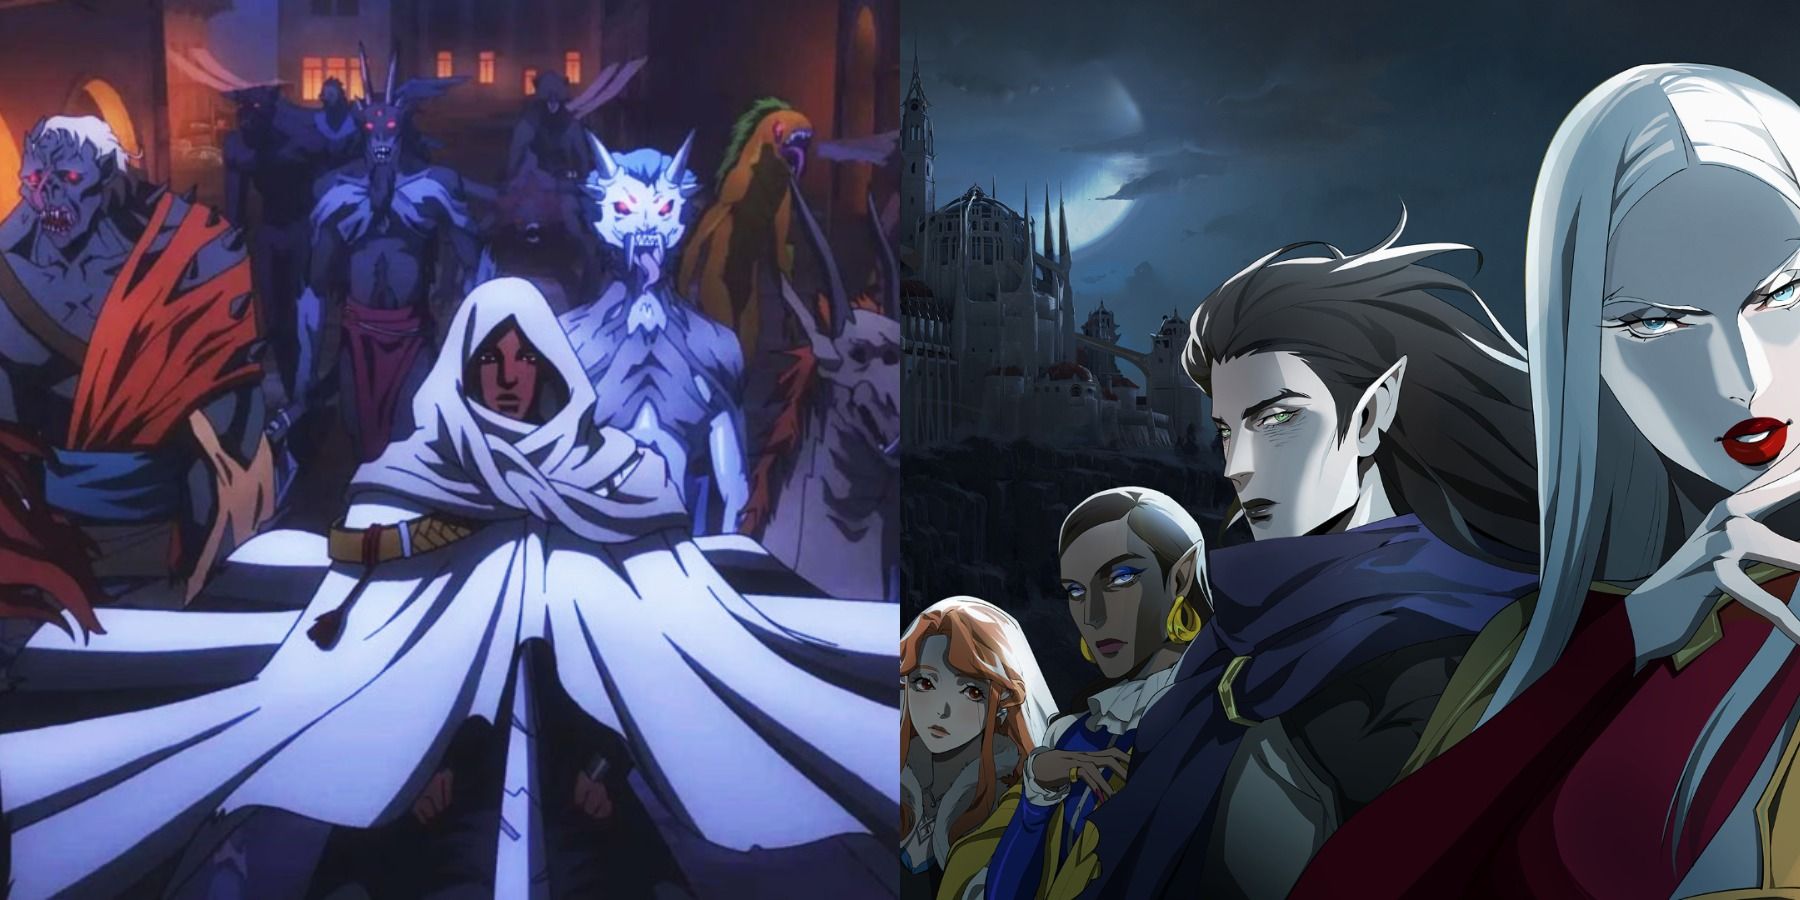 Isaac and his demon army and the Council of Sisters in Castlevania season 3